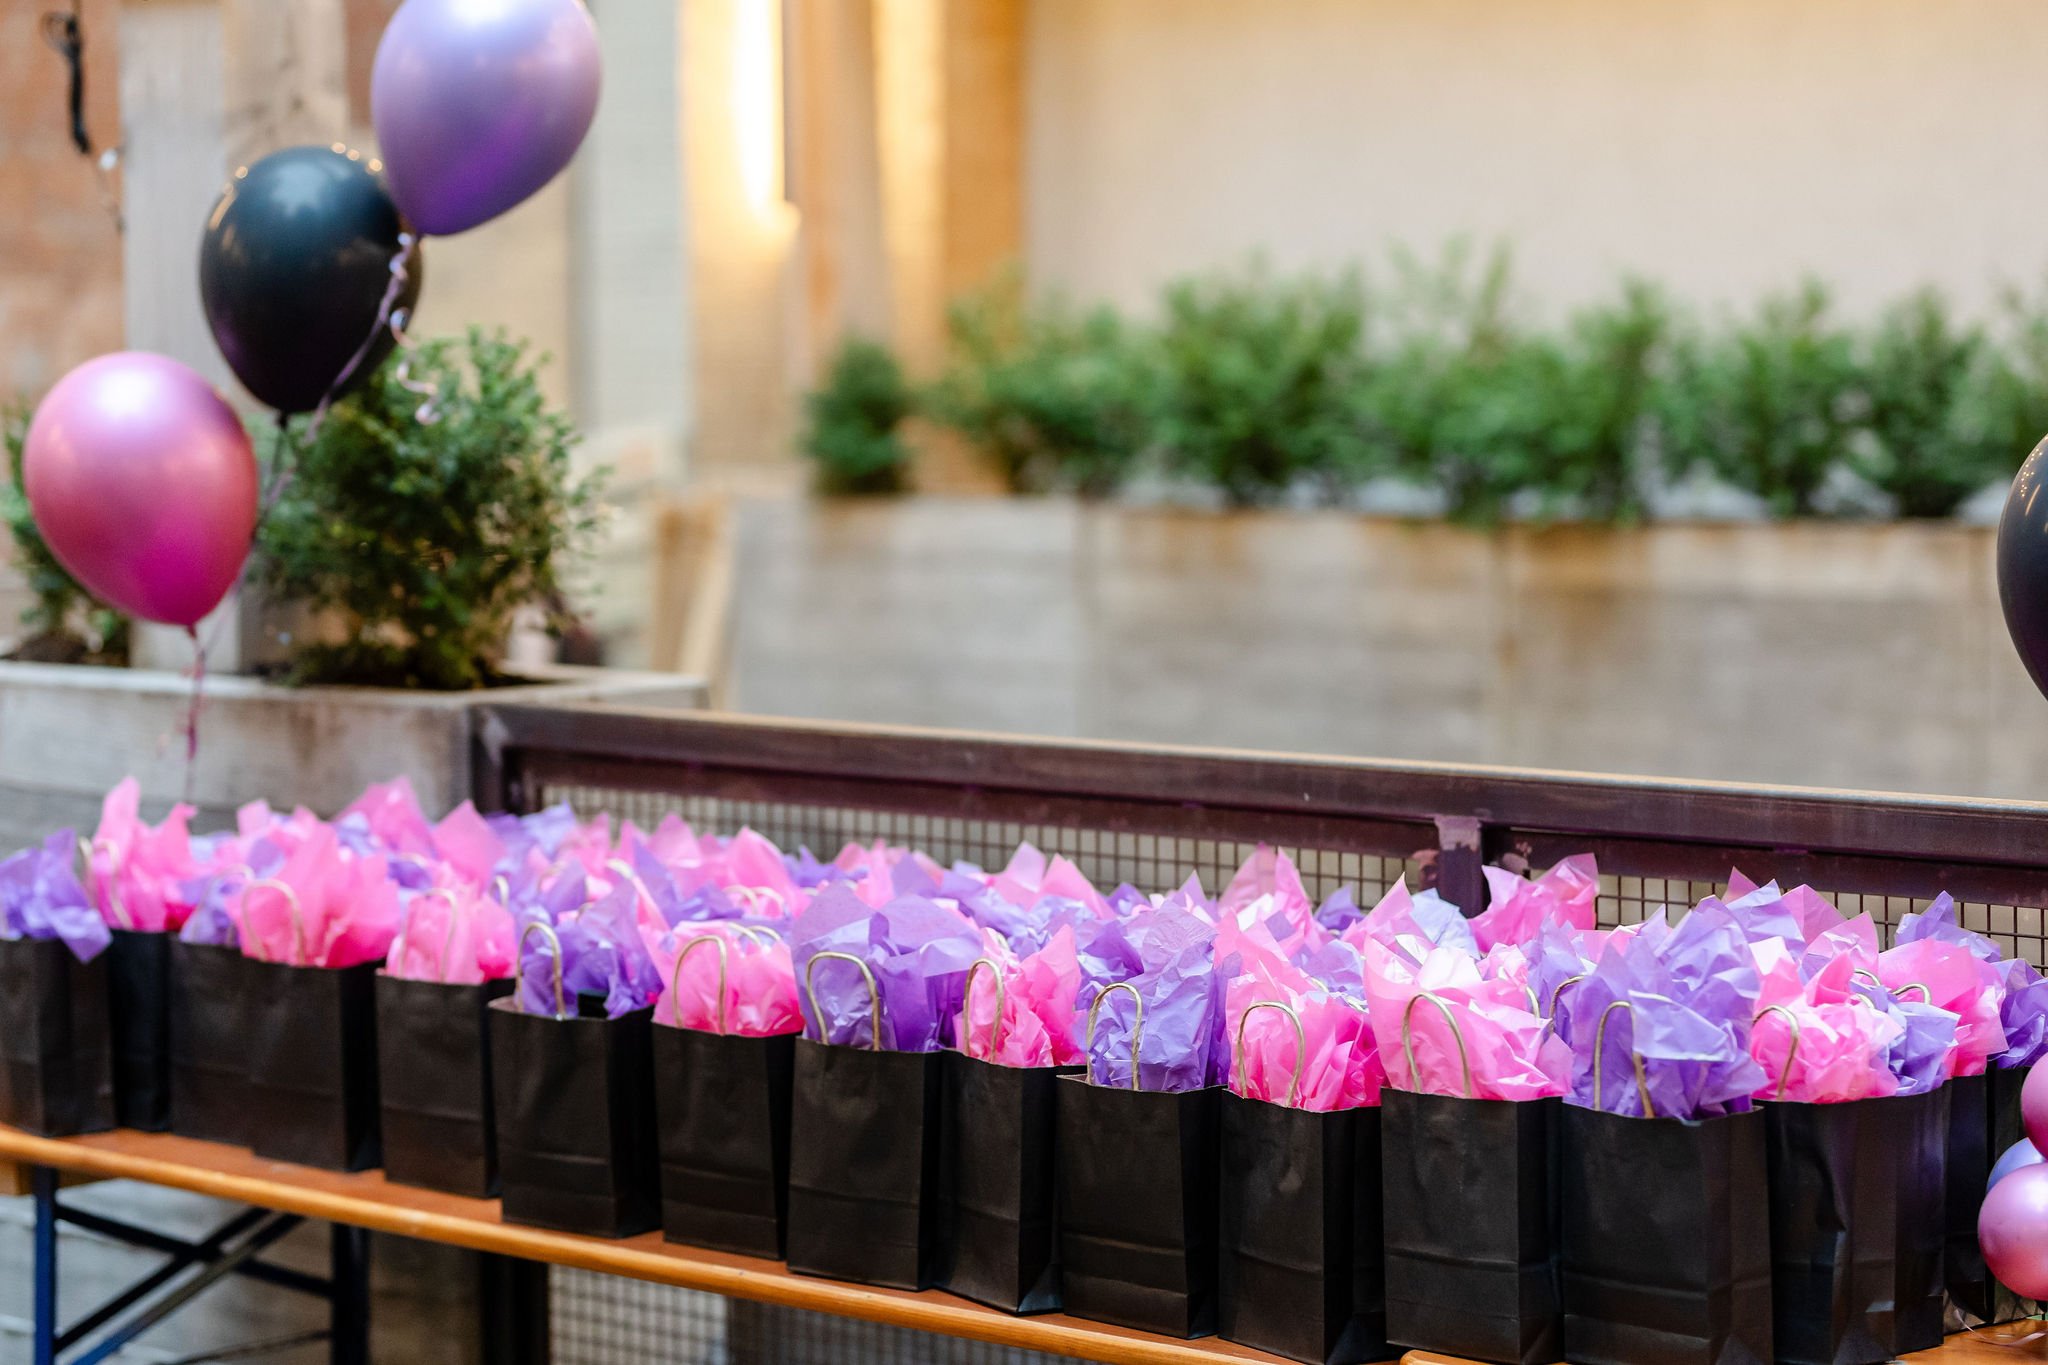 A visually captivating social event photography scene featuring a vibrant arrangement of black and purple bags and balloons.